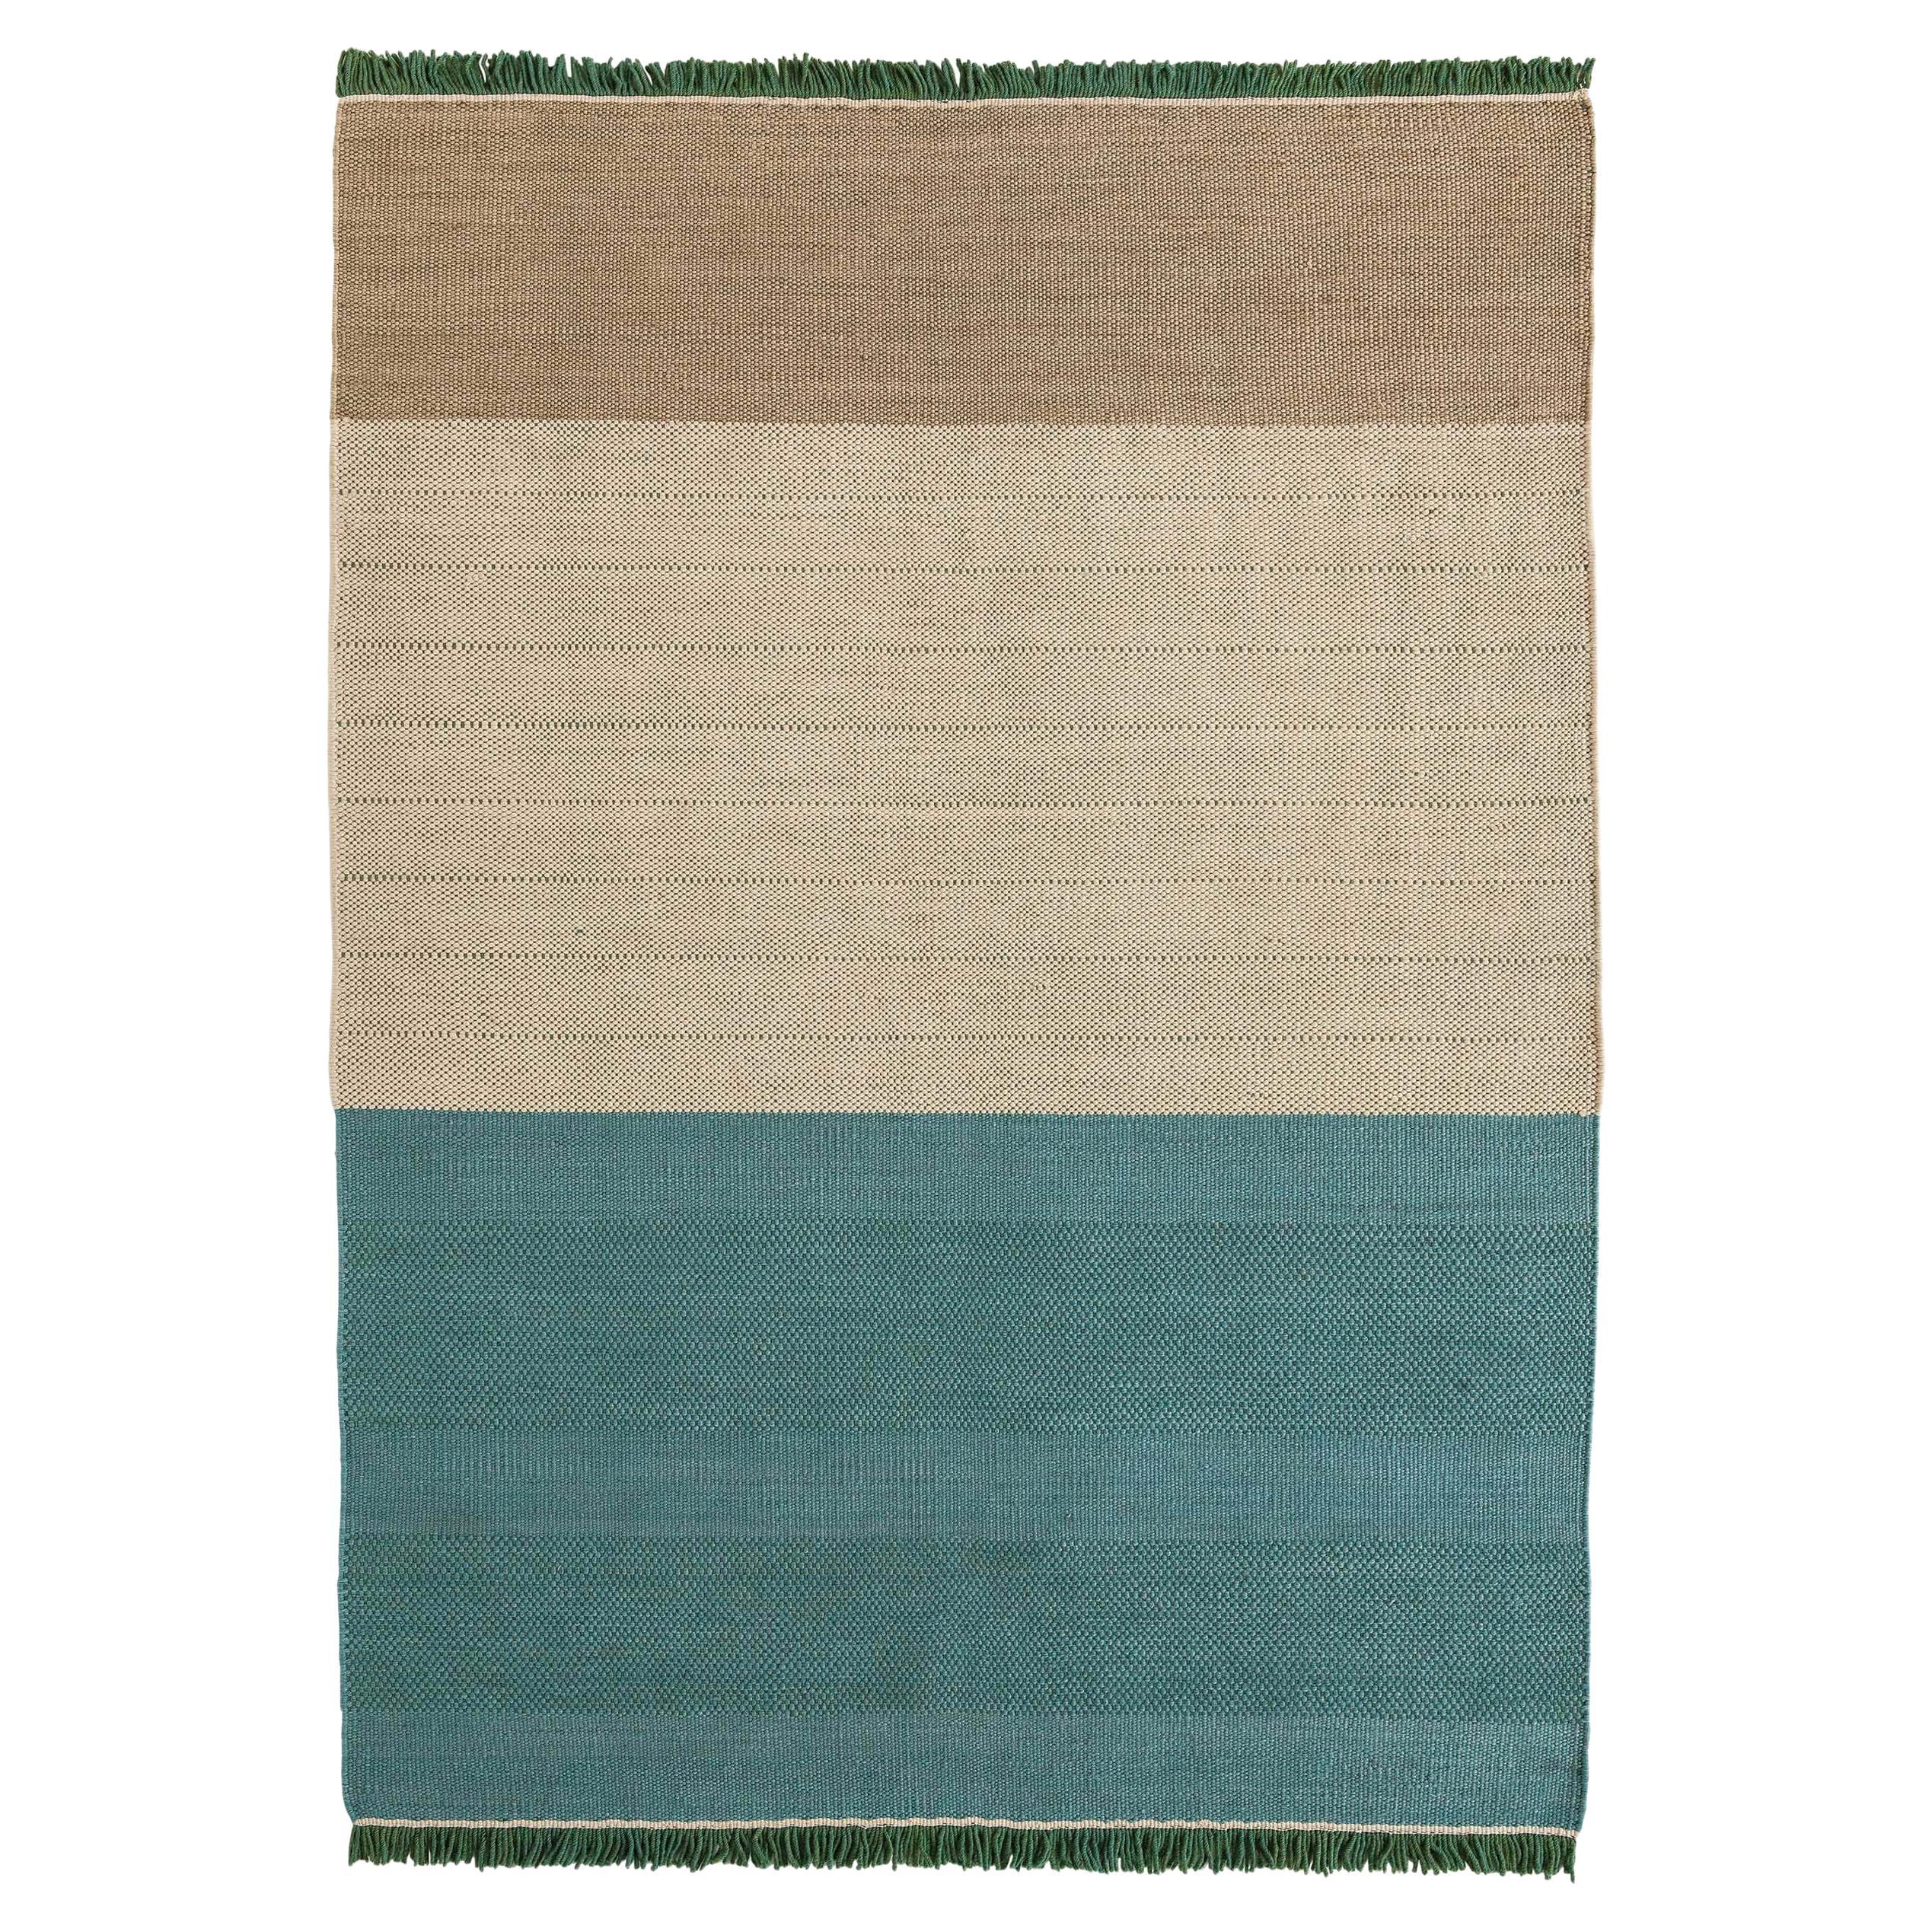 Hand-Loomed Tres Stripes Rug in Green by Nani Marquina & Elisa Padro, Large For Sale